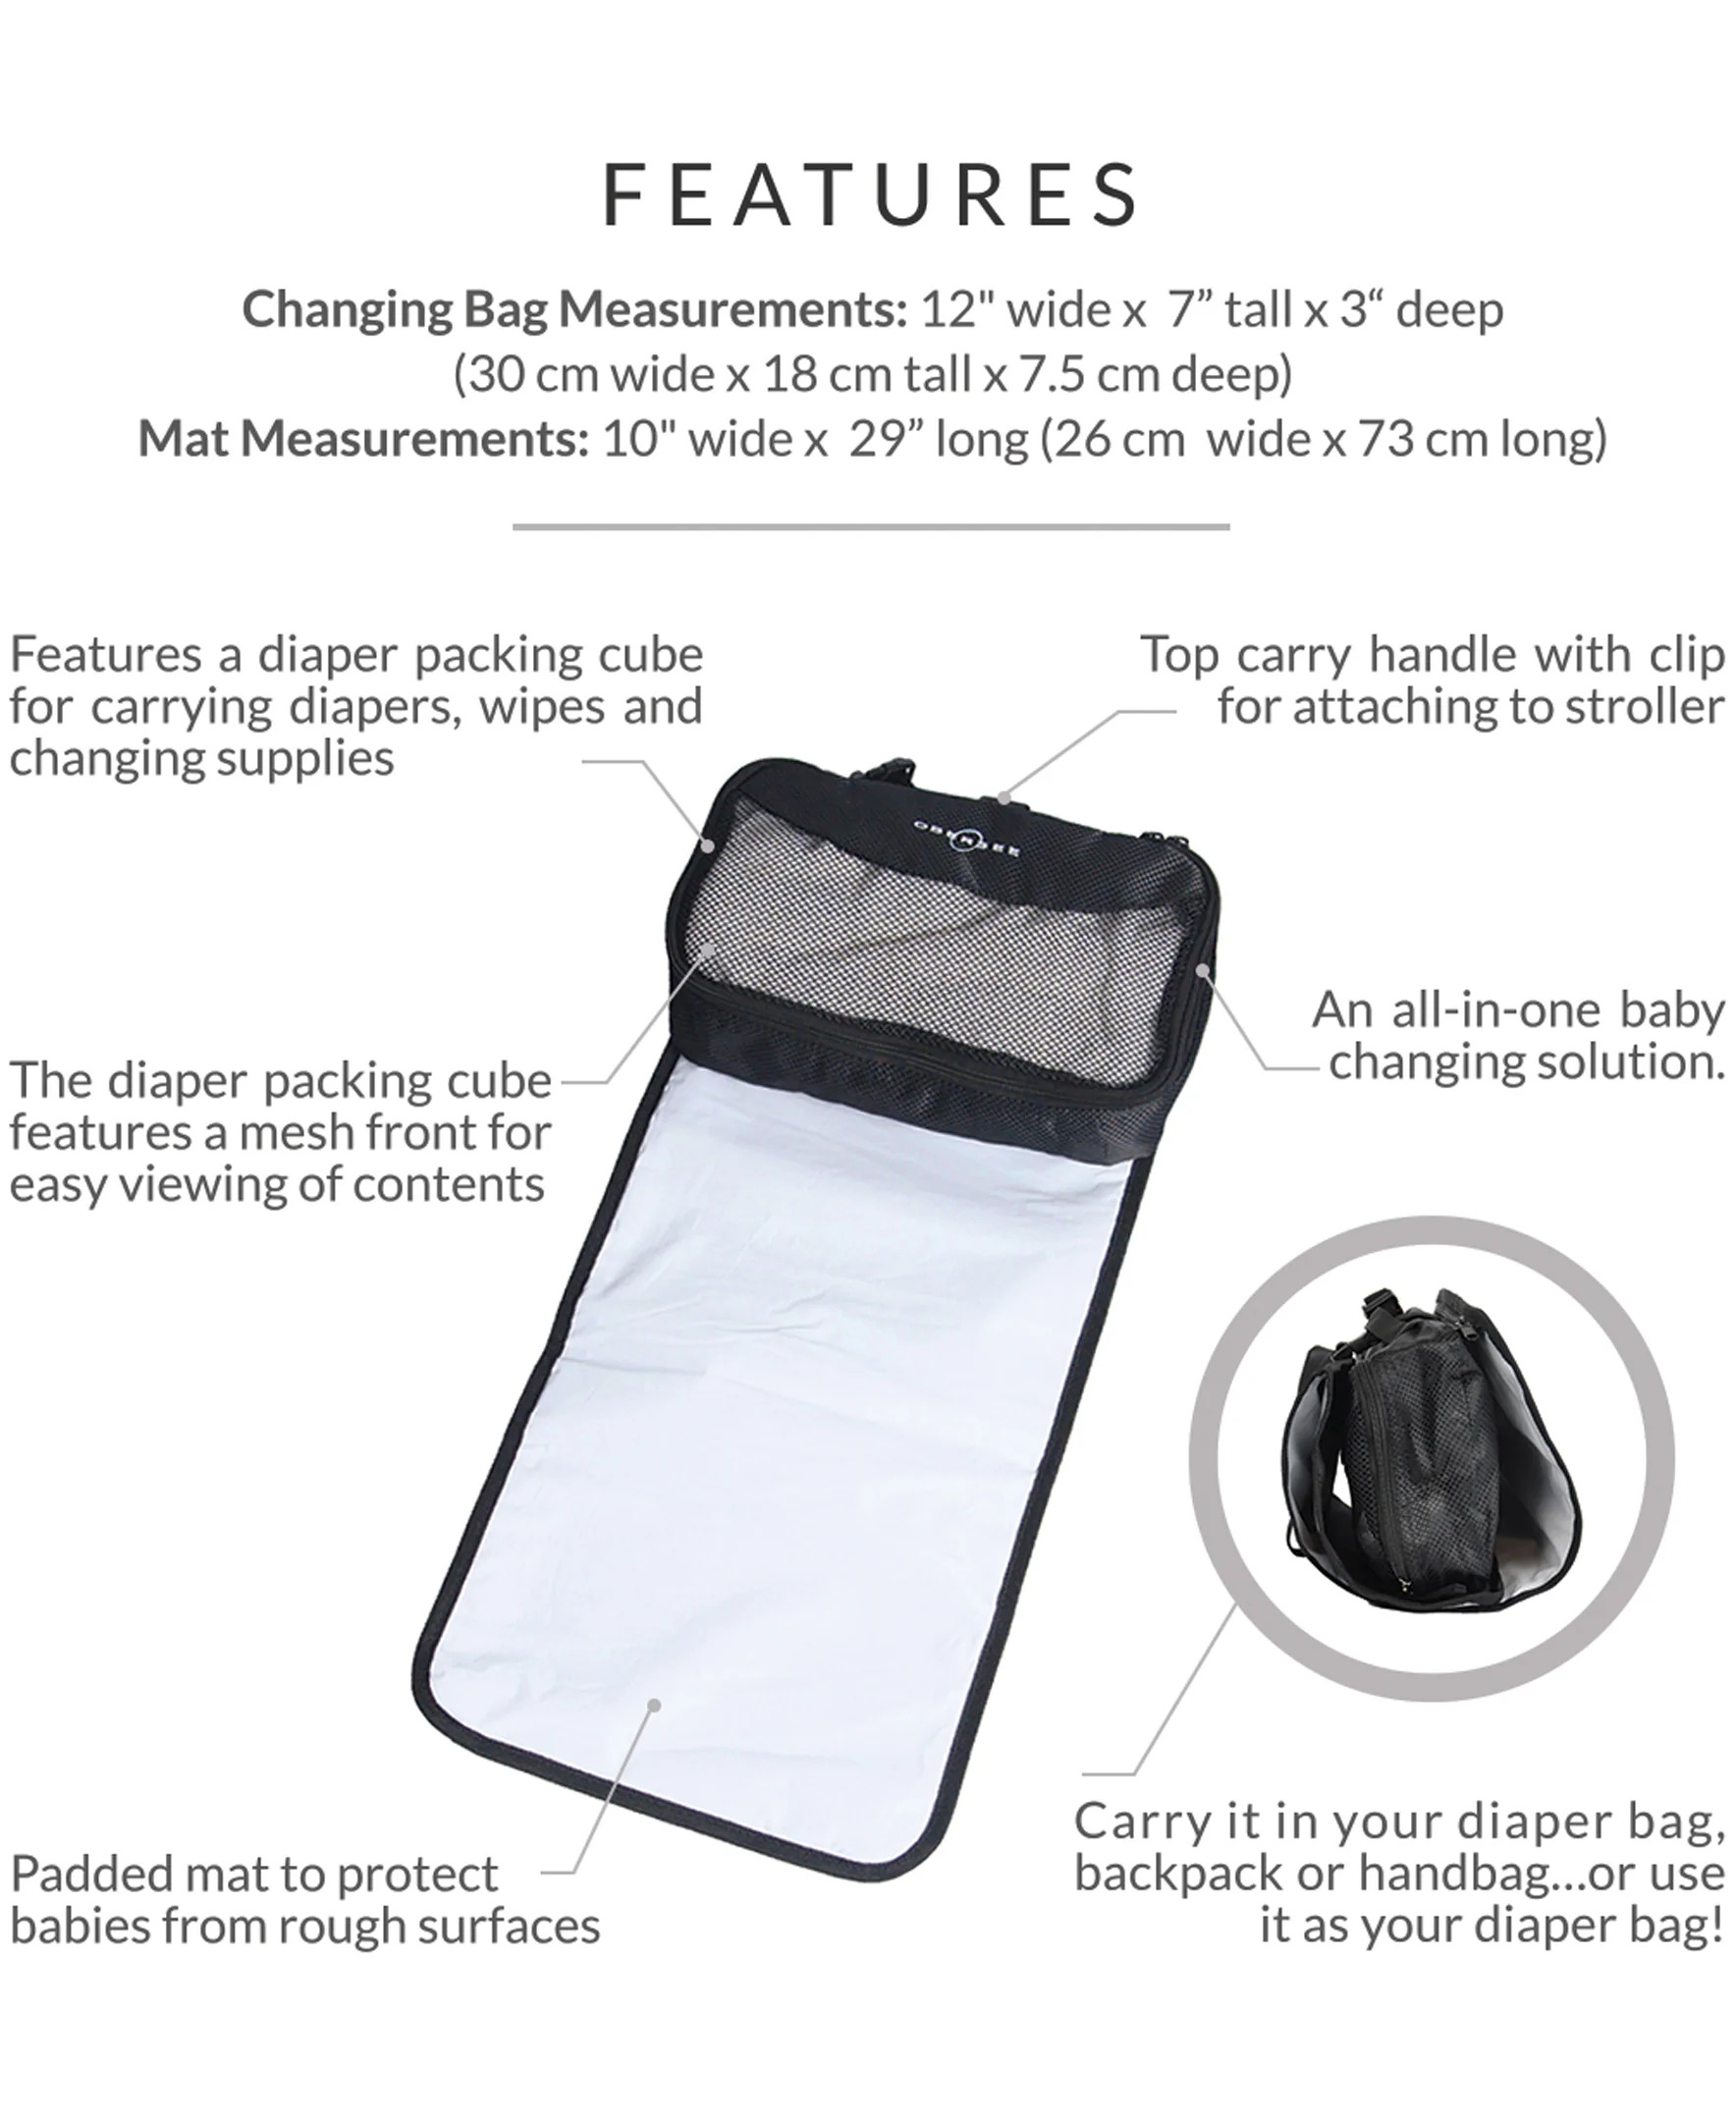 Obersee Diaper Bag Organizer Changing Station - image 1 of 4